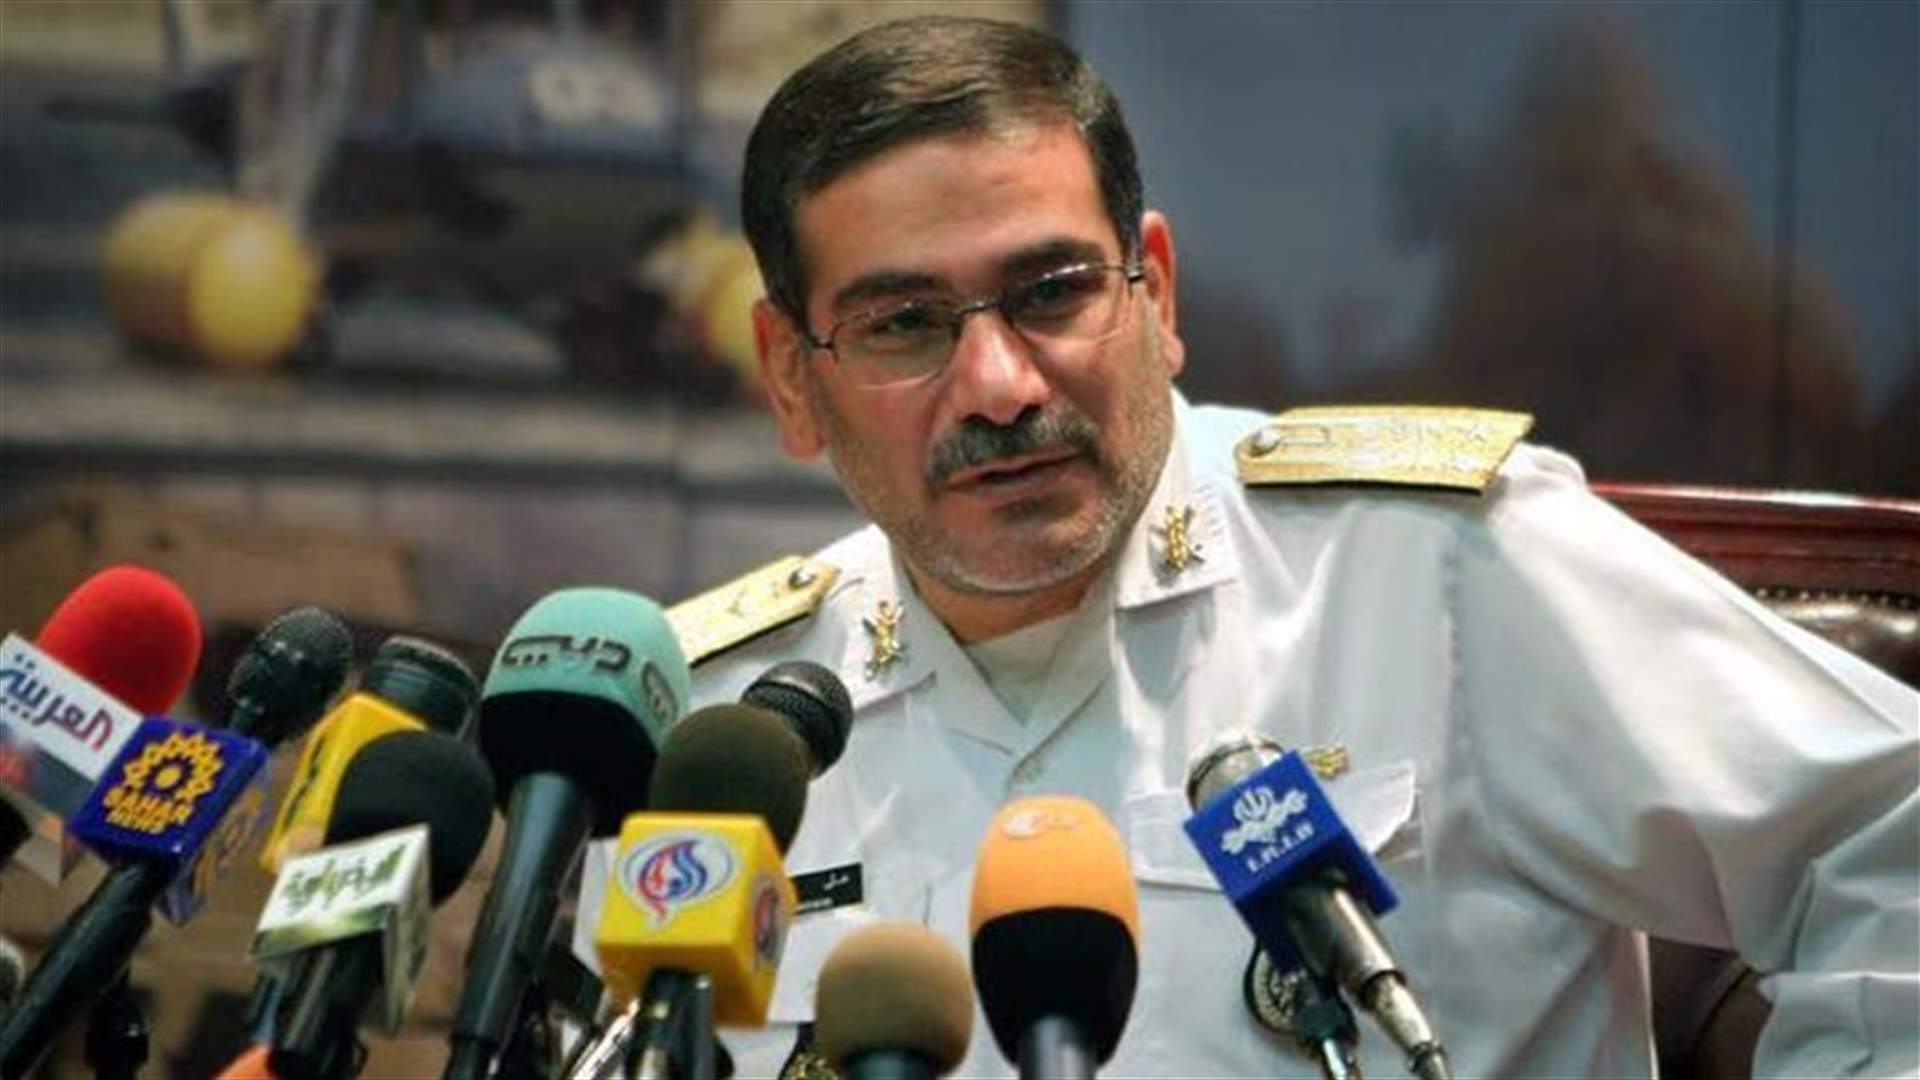 Iran seeks de-escalation but will give crushing response to any attack - security official